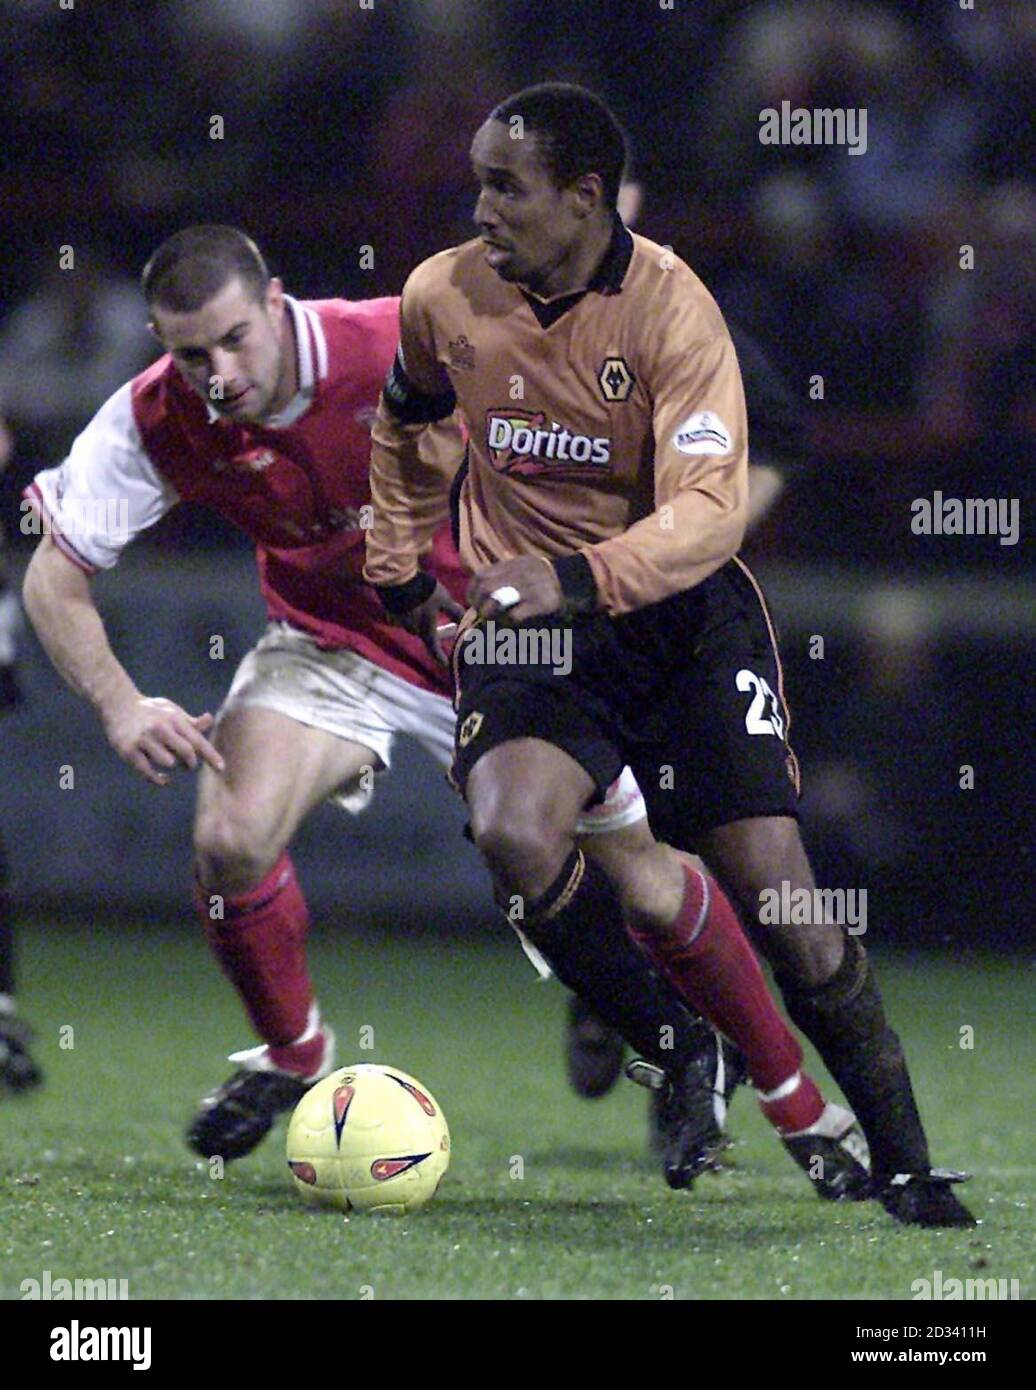 Wolverhampton Wanderers' Paul Ince takes on Rotherham United's Alan Lee (L) during their Nationwide League Division One match at Rotherham's Millmoor stadium. THIS PICTURE CAN ONLY BE USED WITHIN THE CONTEXT OF AN EDITORIAL FEATURE. NO UNOFFICIAL CLUB WEBSITE USE. Stock Photo